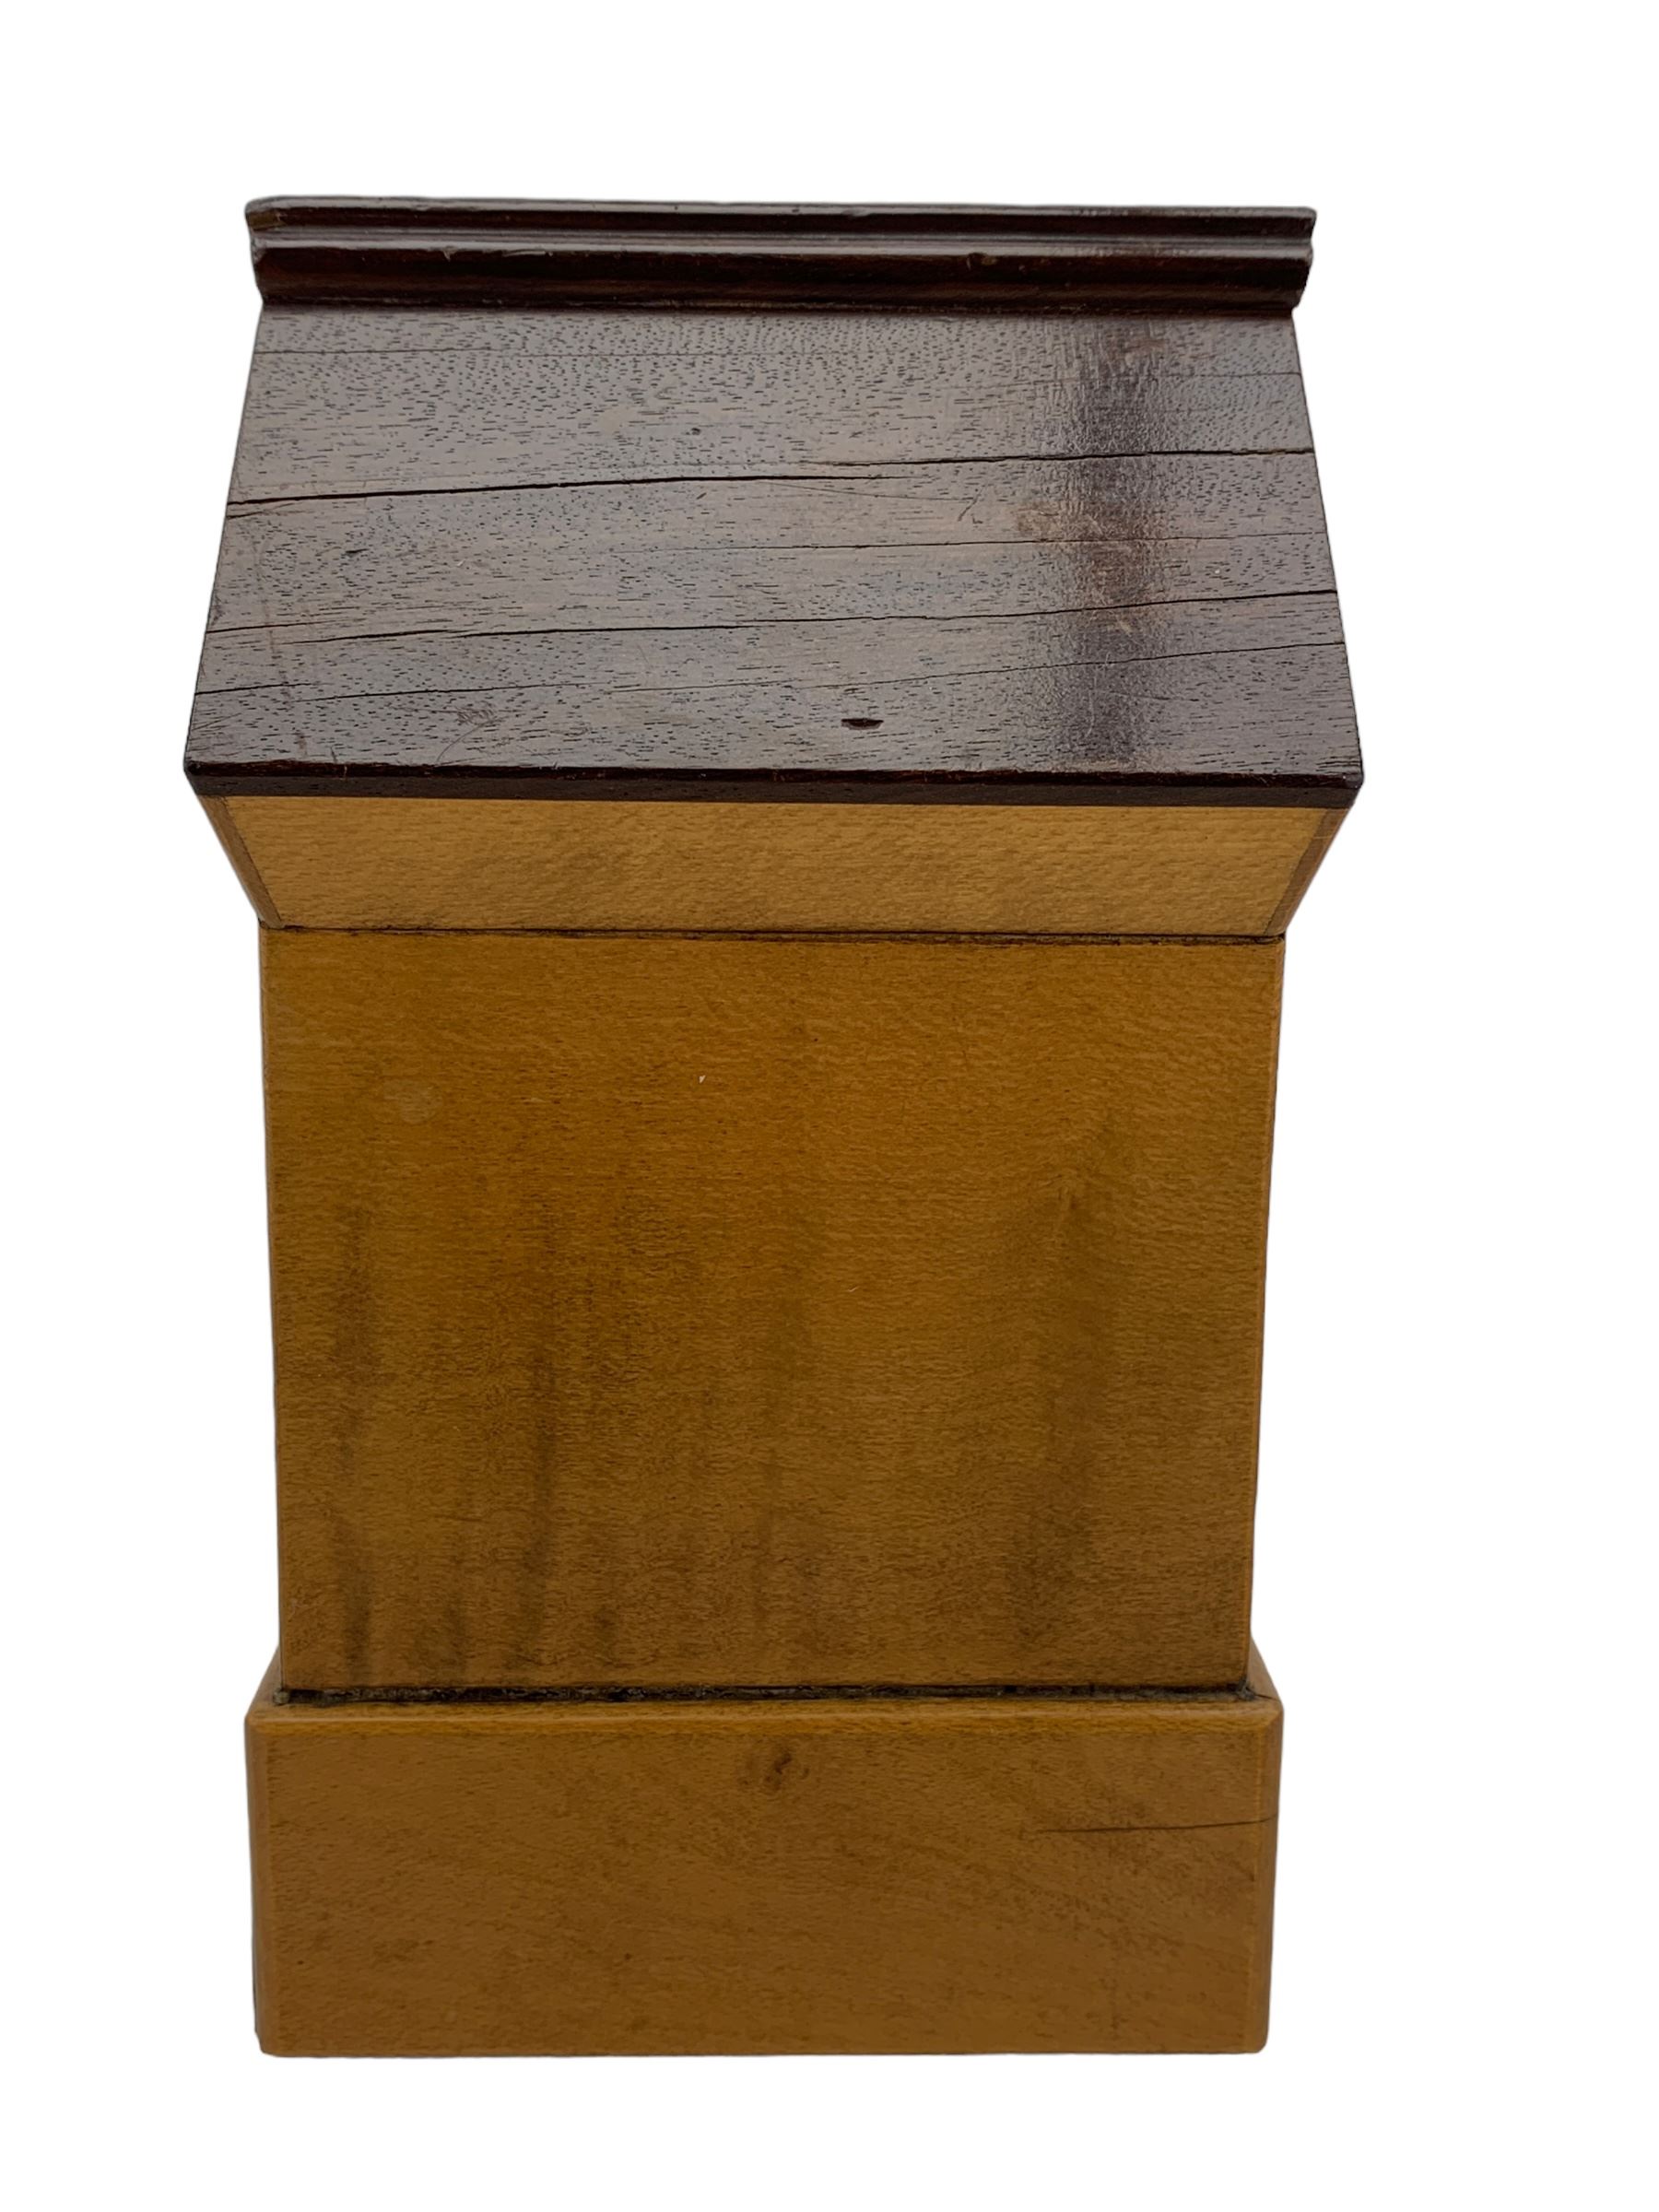 Early 20th century marquetry puzzle money box in the form of a house - Image 4 of 5